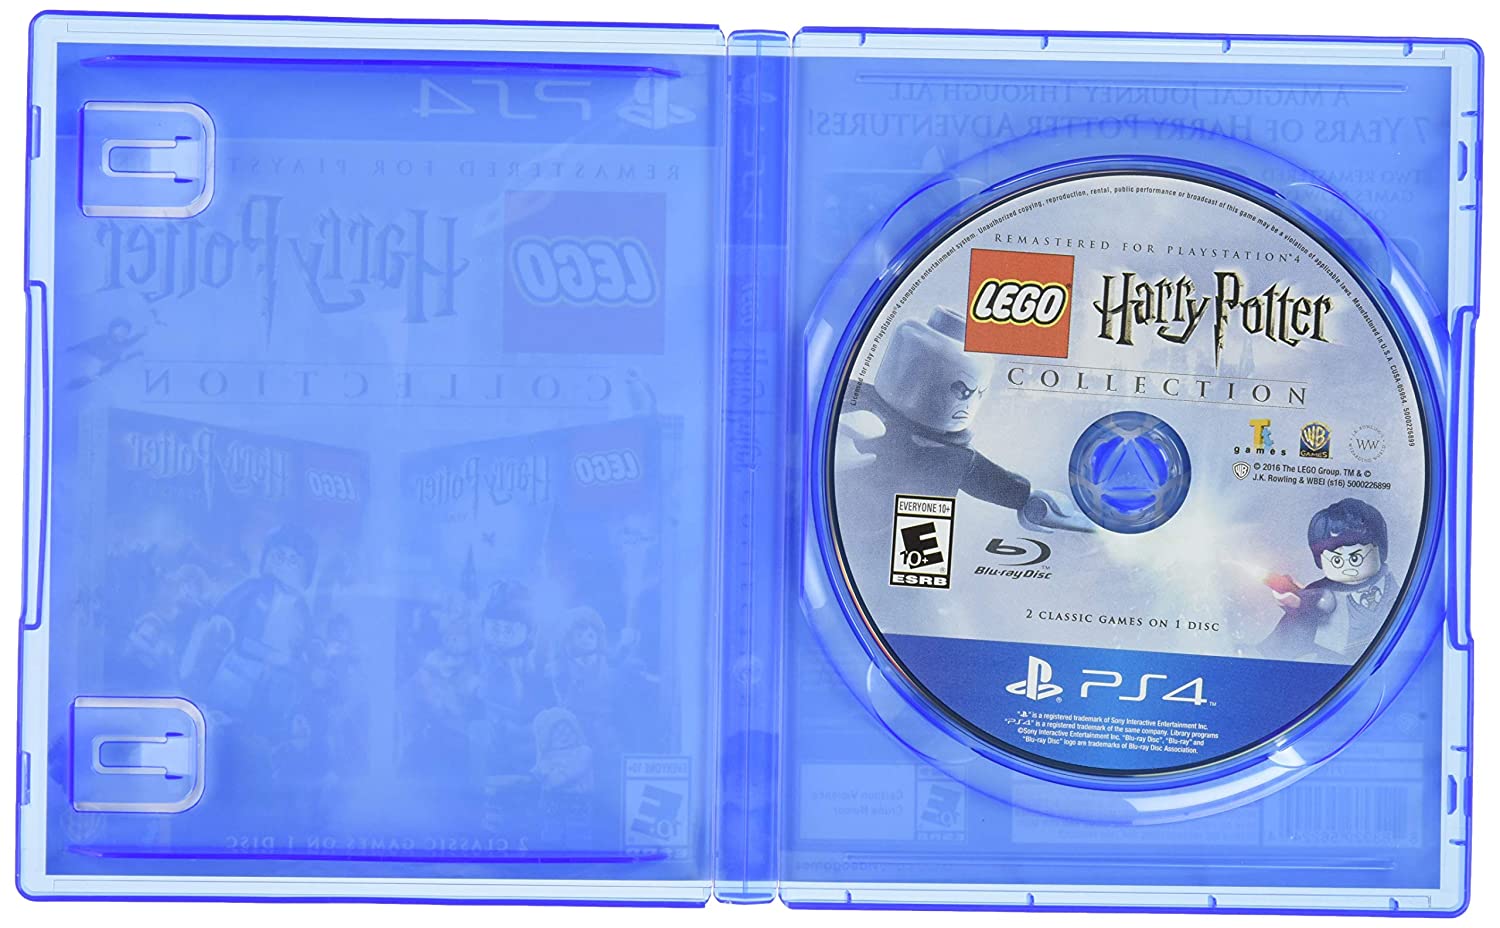 Lego Harry Potter Collection Adventure New Video Games Is for Everyone 10+ PlayStation 4 - image 3 of 8